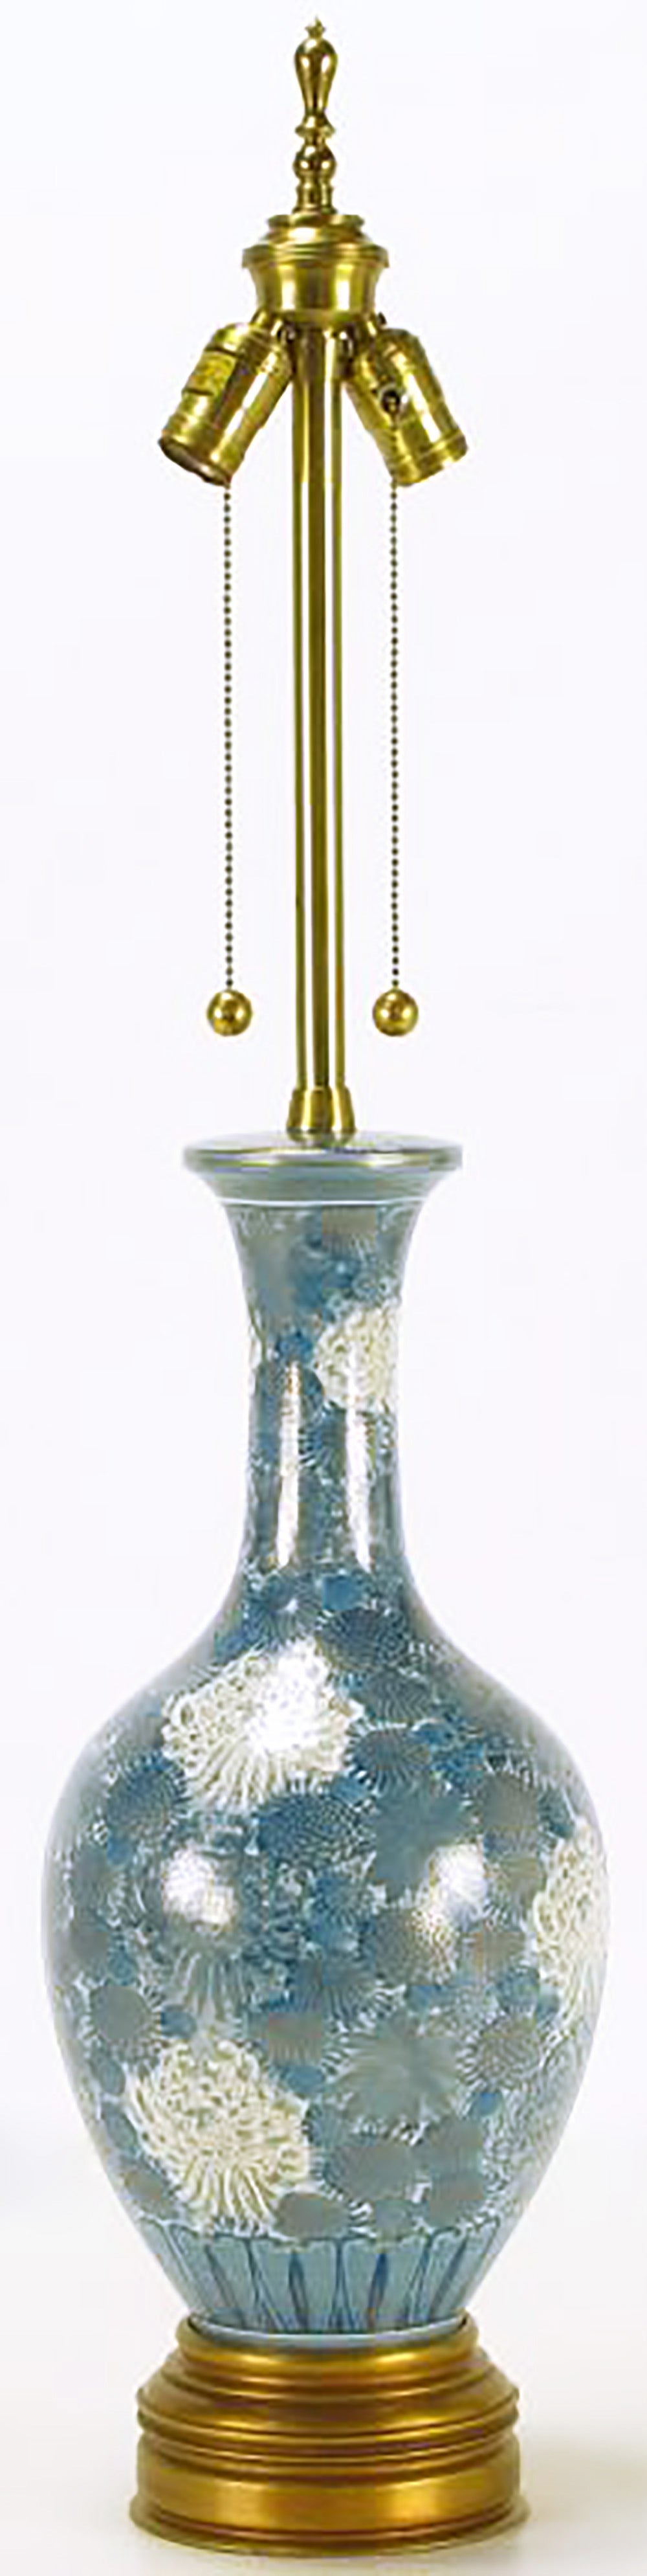 Marbro Lamp Company blue and white porcelain vase-form table lamp. Hand-painted blue and white chrysanthemums are outlined lined in gold leaf. Gilt brass base and brass stem with double socket cluster. Ball and chain pull switches. Sold sans shade.